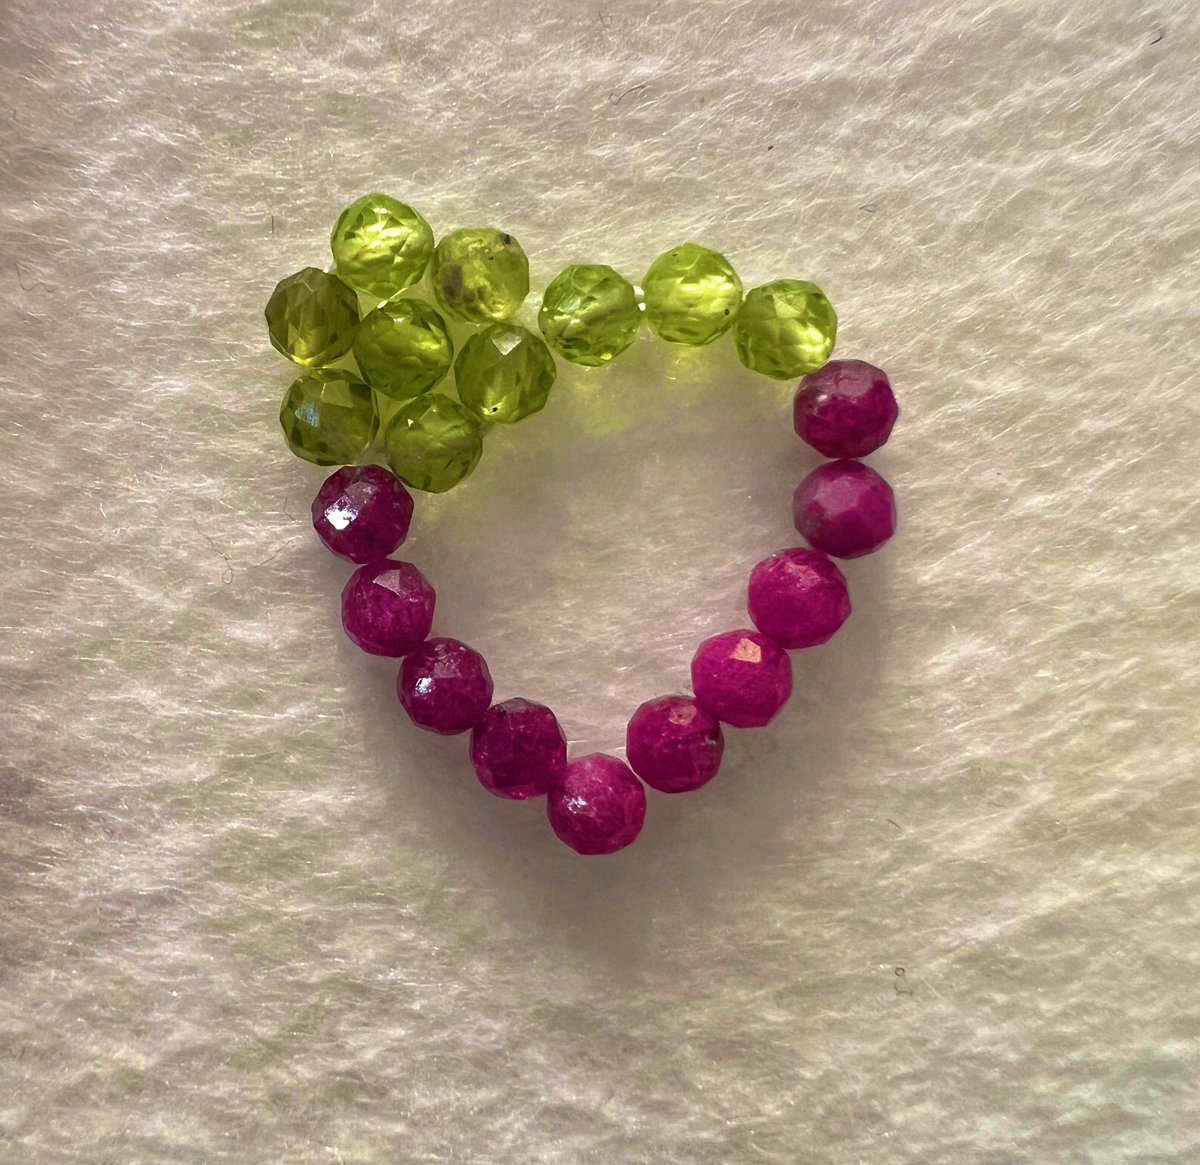 Peridot, rubies, and a wee reminder to the Indigenous women who are showing up today to take seats at tables not built by or for us: I am proud of you. It’s okay to be nervous, but remember: you are exceptional, and your hearts and minds will change the world.